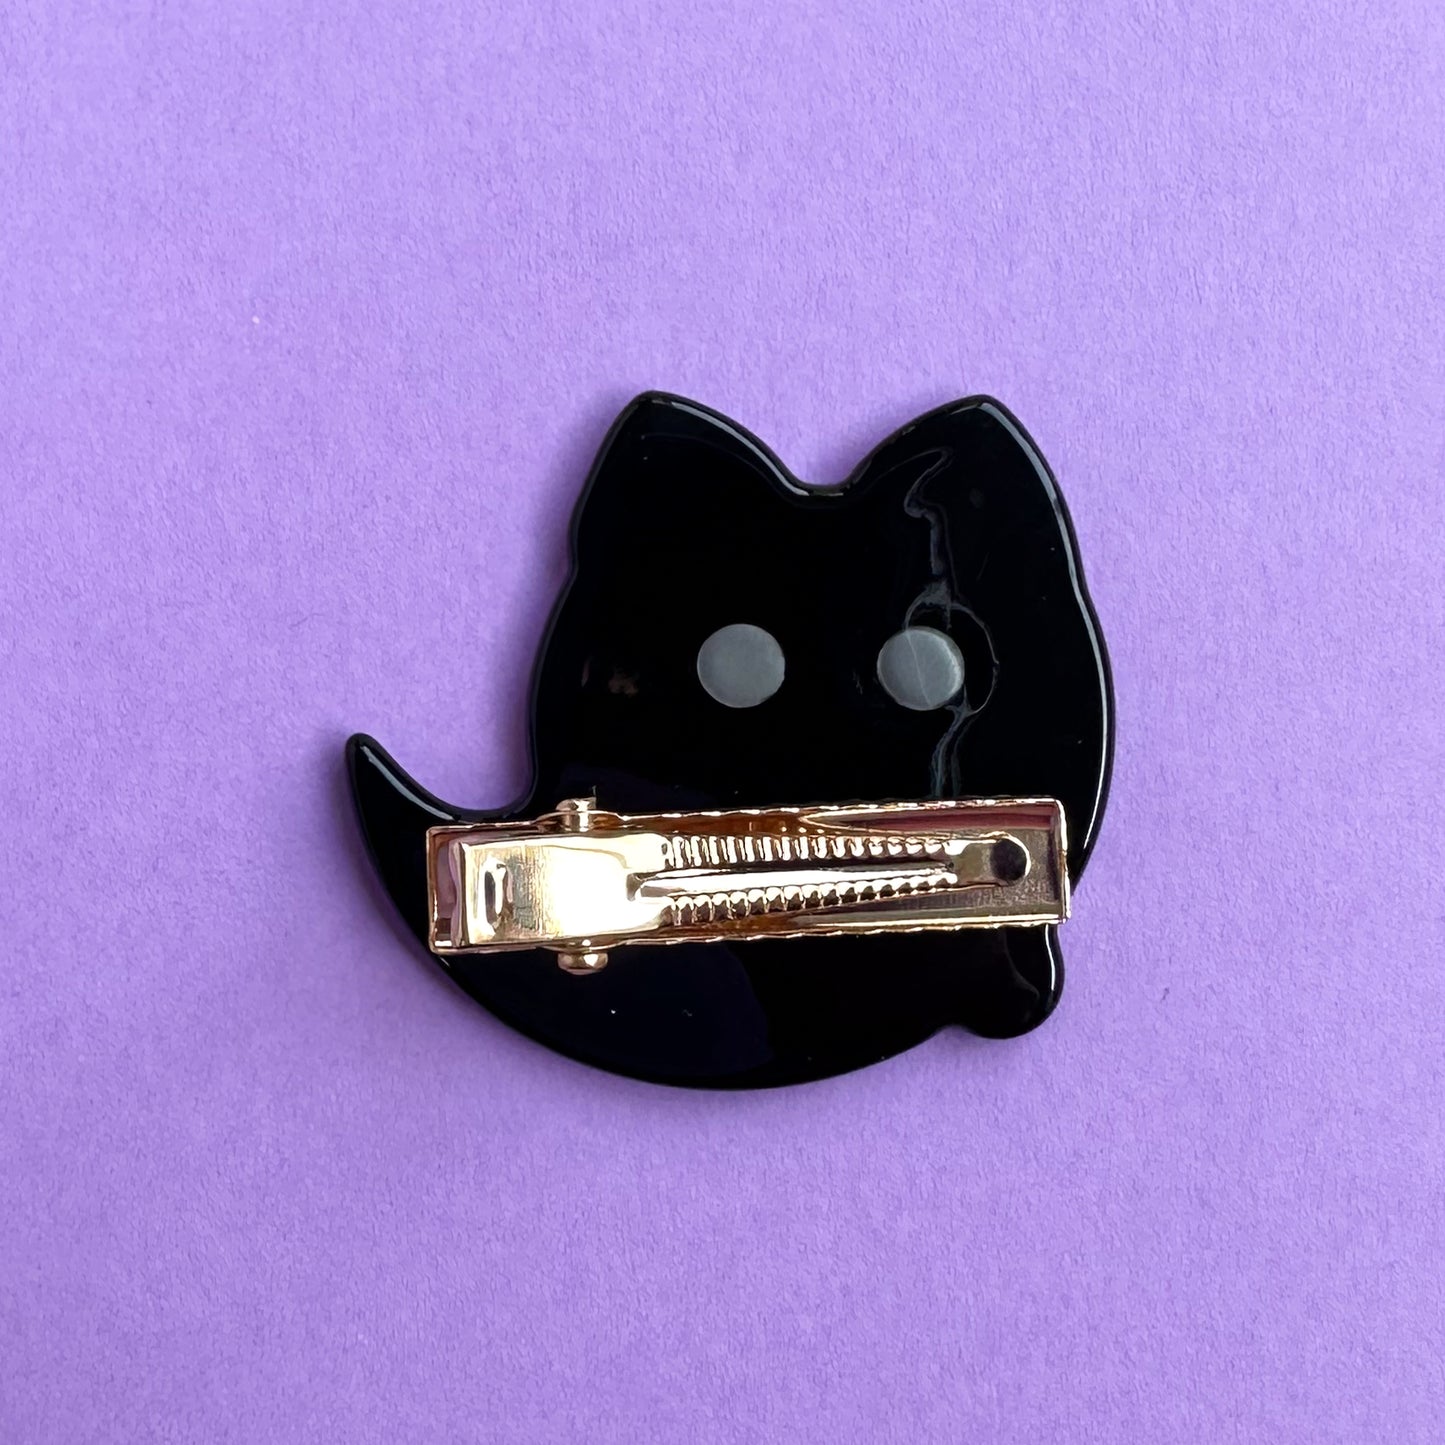 The back of the ghost kitty hair clip which is black with a gold alligator style clip attached. 